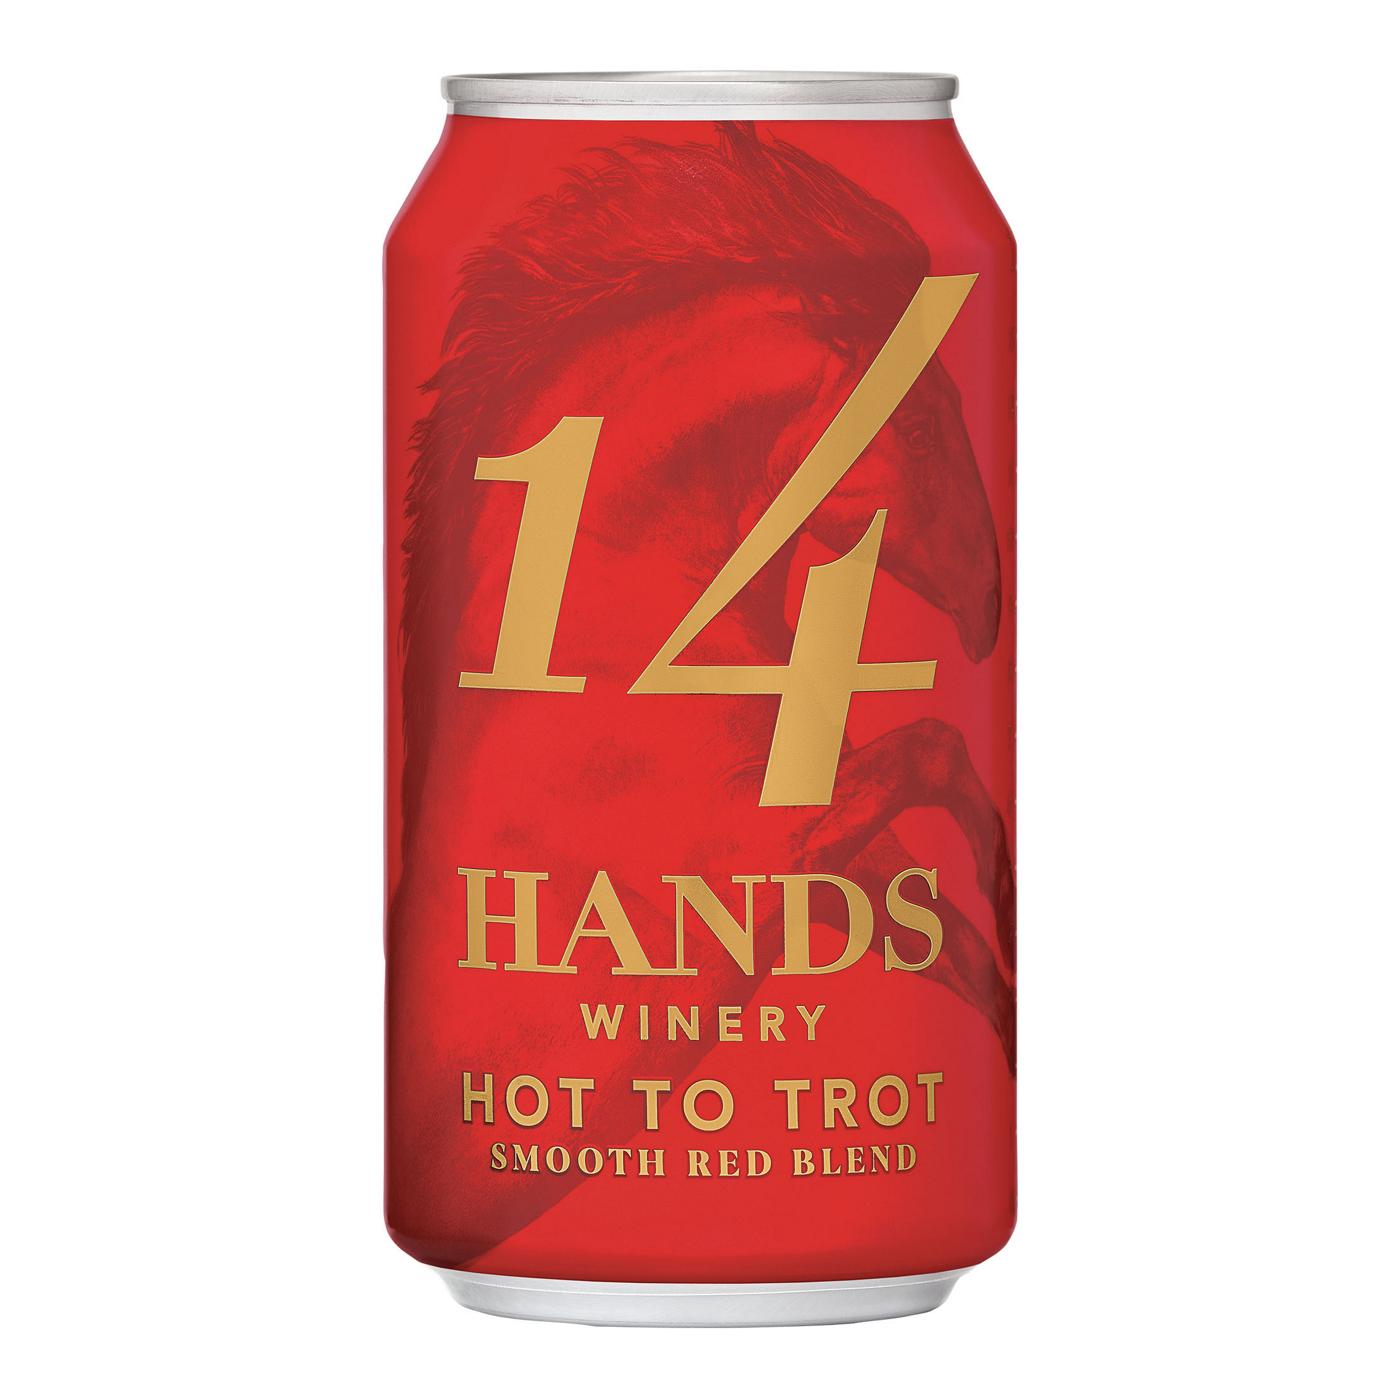 14 Hands Hot to Trot Smooth Red Blend Wine Can; image 1 of 4